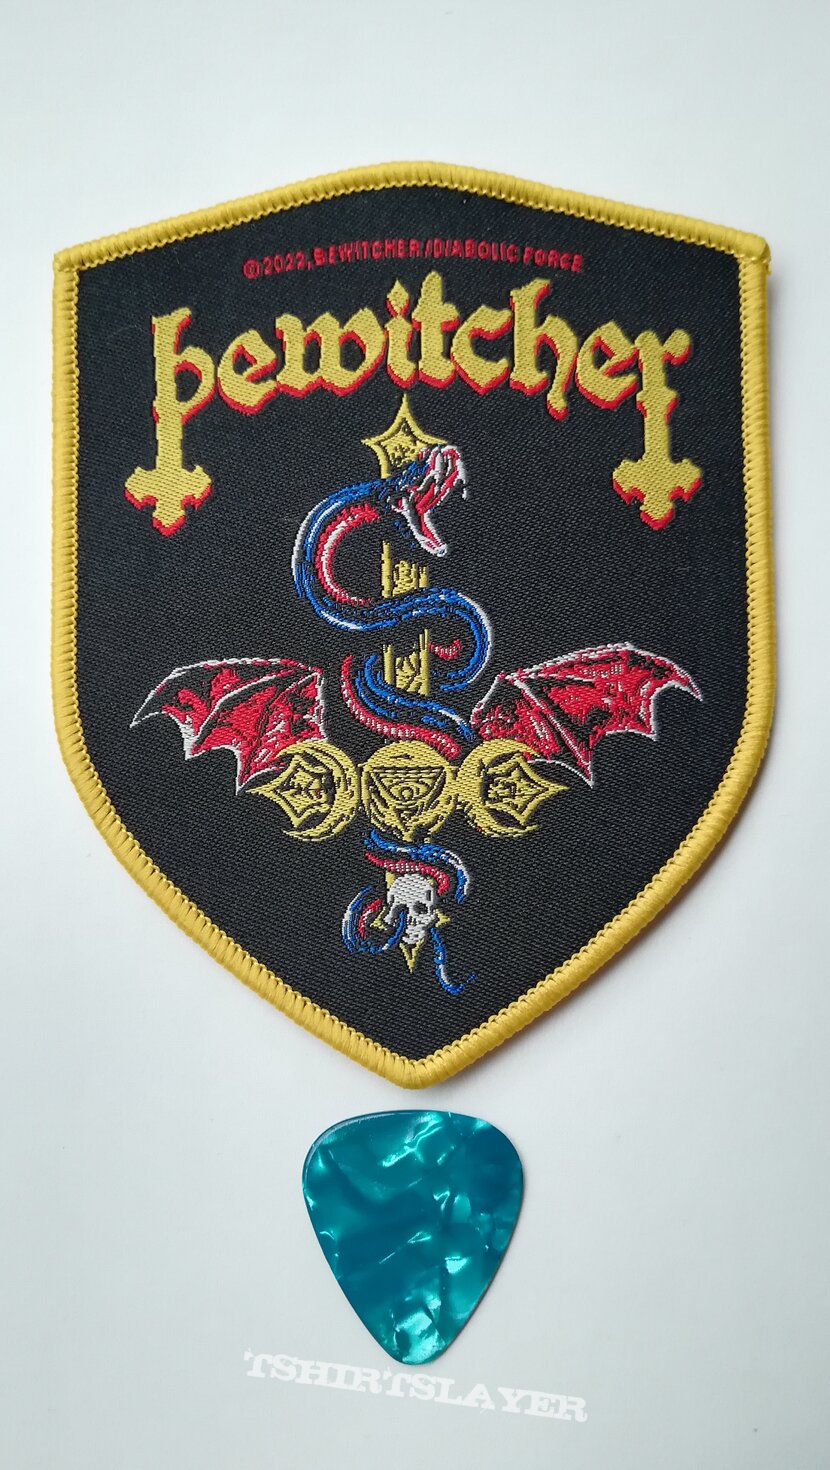 Bewitcher - The Witching Cross - Patch 